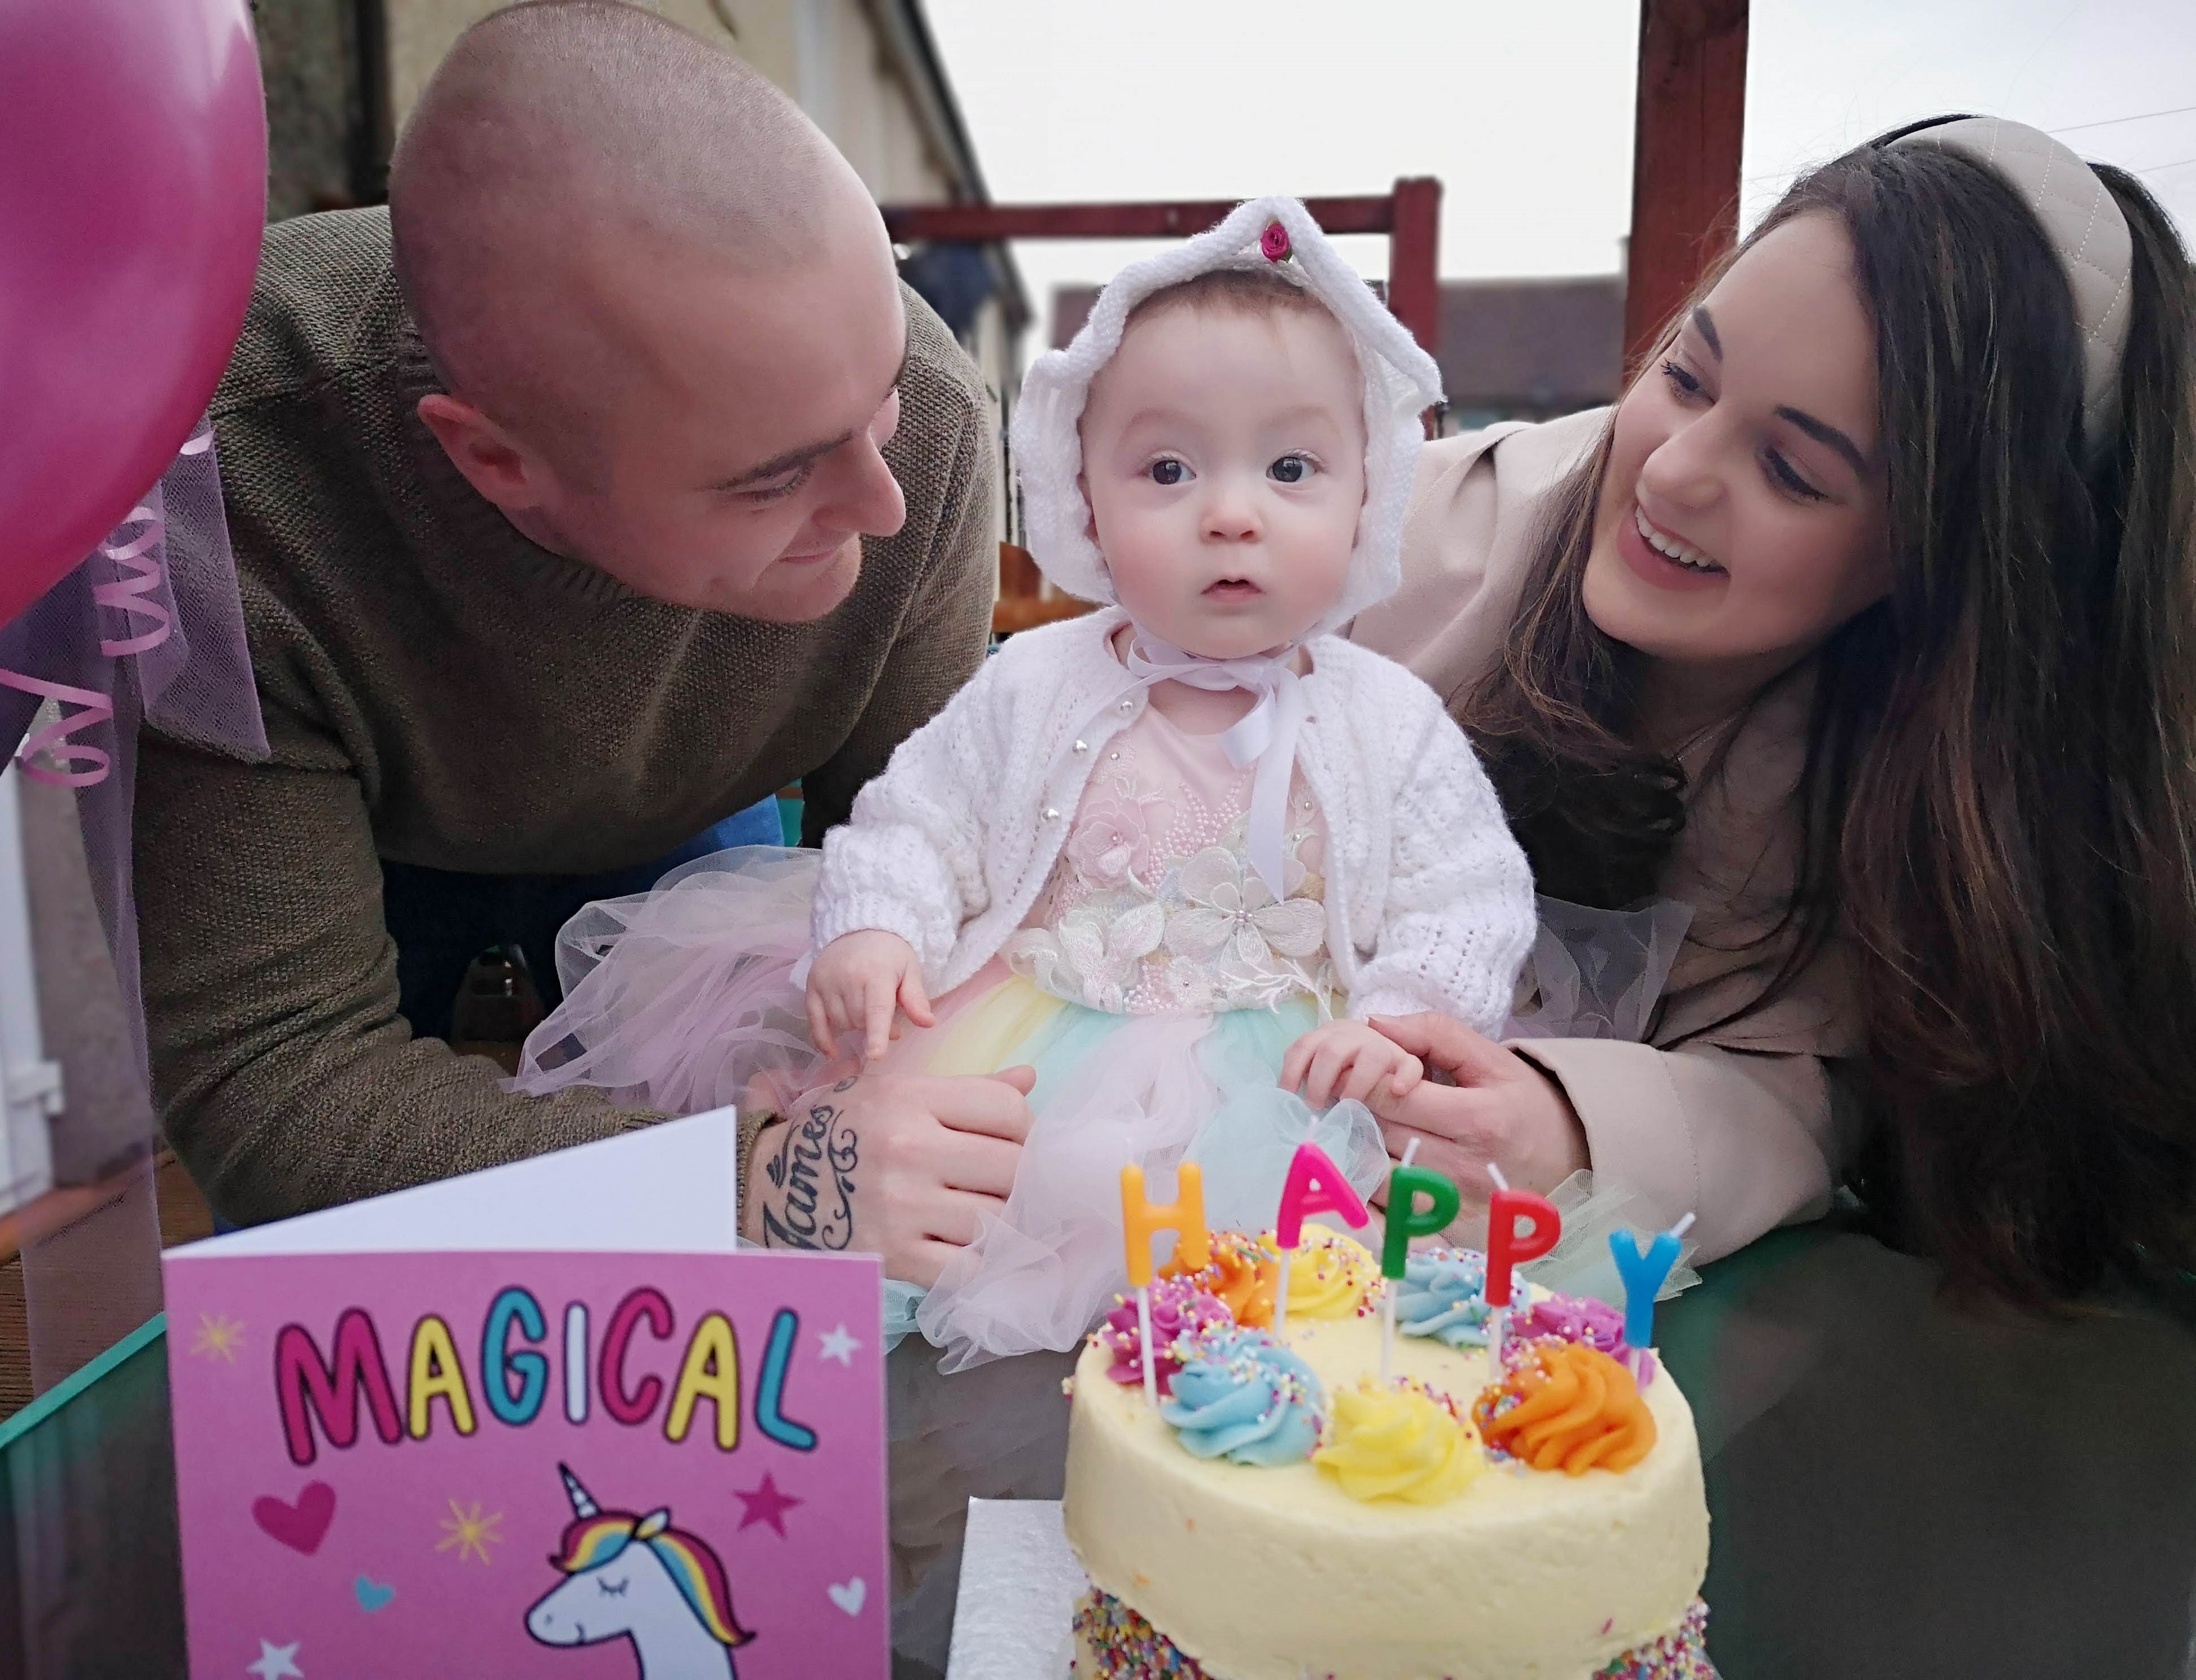 Tot who battled COVID as a baby is thriving as first birthday celebrations approach